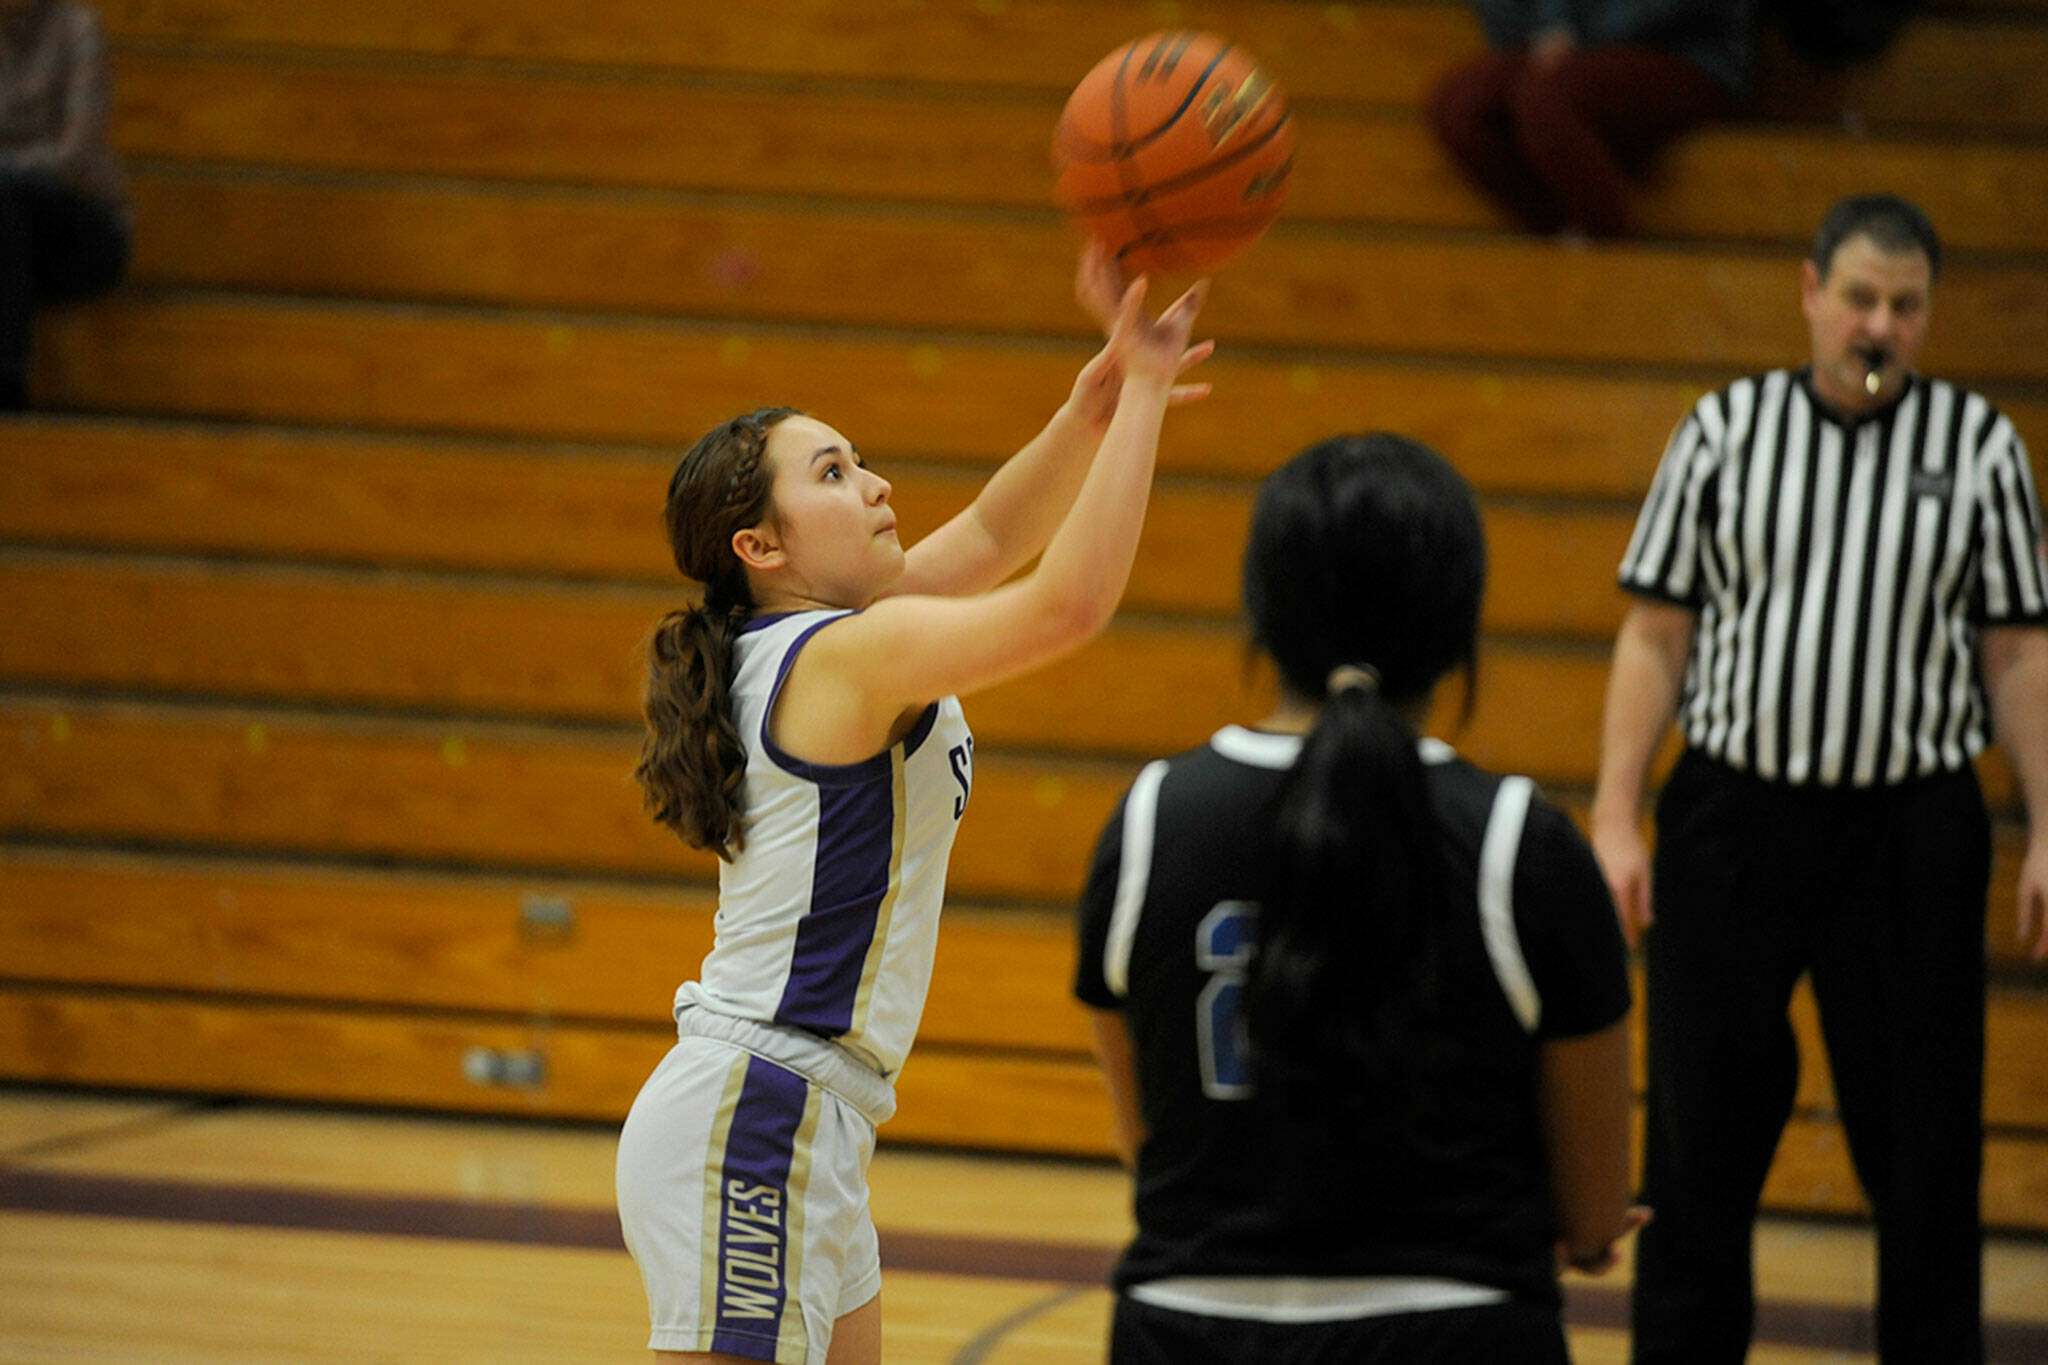 Sequim Gazette photo by Matthew Nash/ Sydney Thomas-Harris shoots one of three free throws as a substitute for teammate Libby Turella after she was poked in the eye during a play. Sequim won 73-66 over North Mason.